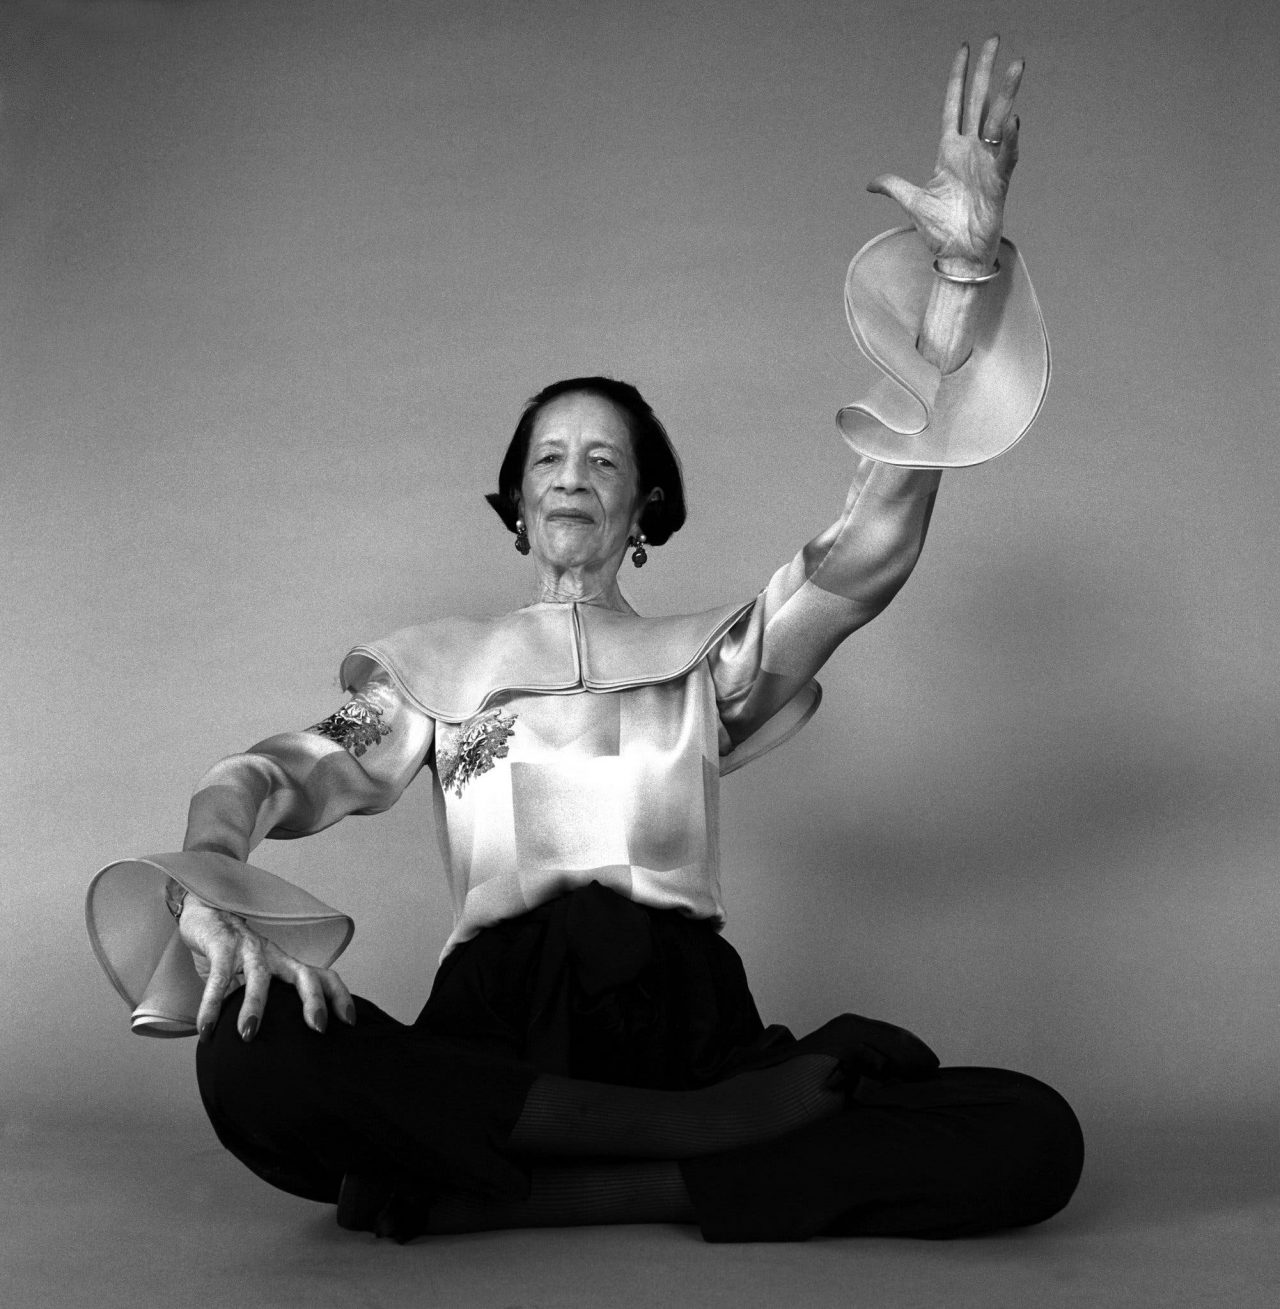 Diana Vreeland was editor-in-chief at Vogue from 1963 until 1971 and then consultant to the Costume Institute of the Metropolitan Museum of Art, New York.